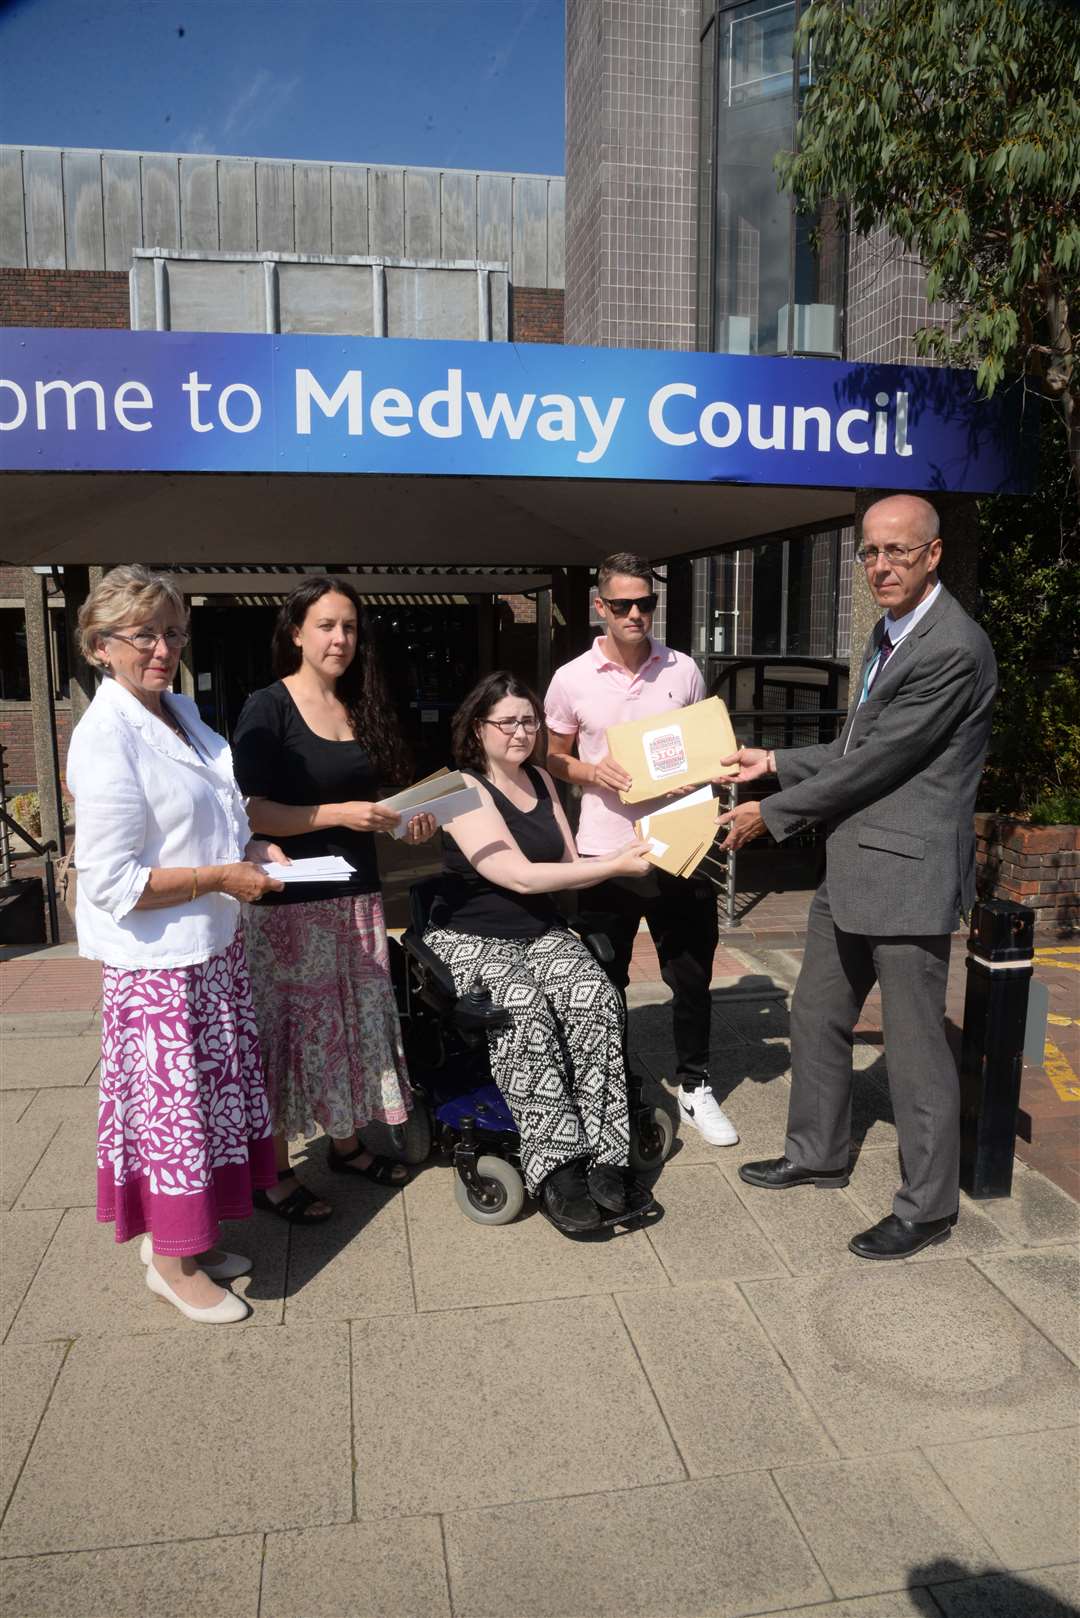 Cllr Kristine Carr, Catriona Jamison, Kate Belmonte and Cllr Martin Potter hand over petitions to Dave Harris, head of planning at Medway Council